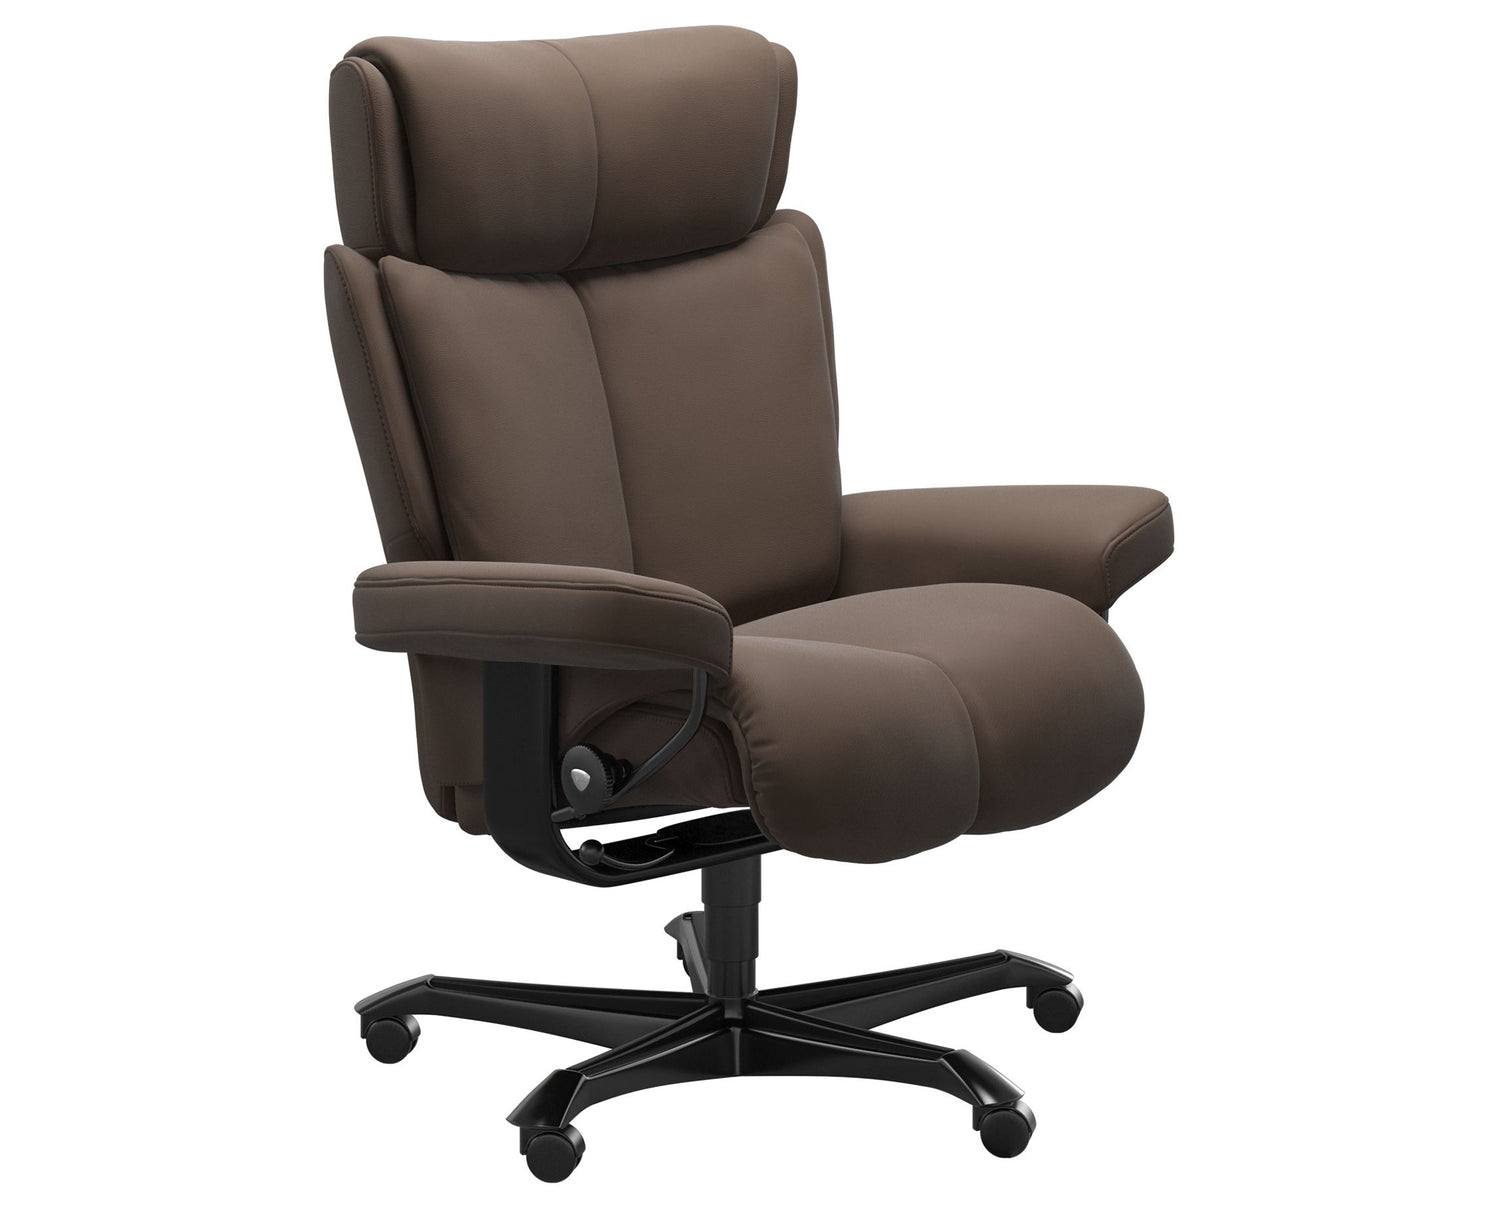 Paloma Leather Espresso M & Black Base | Stressless Magic Home Office Chair | Valley Ridge Furniture